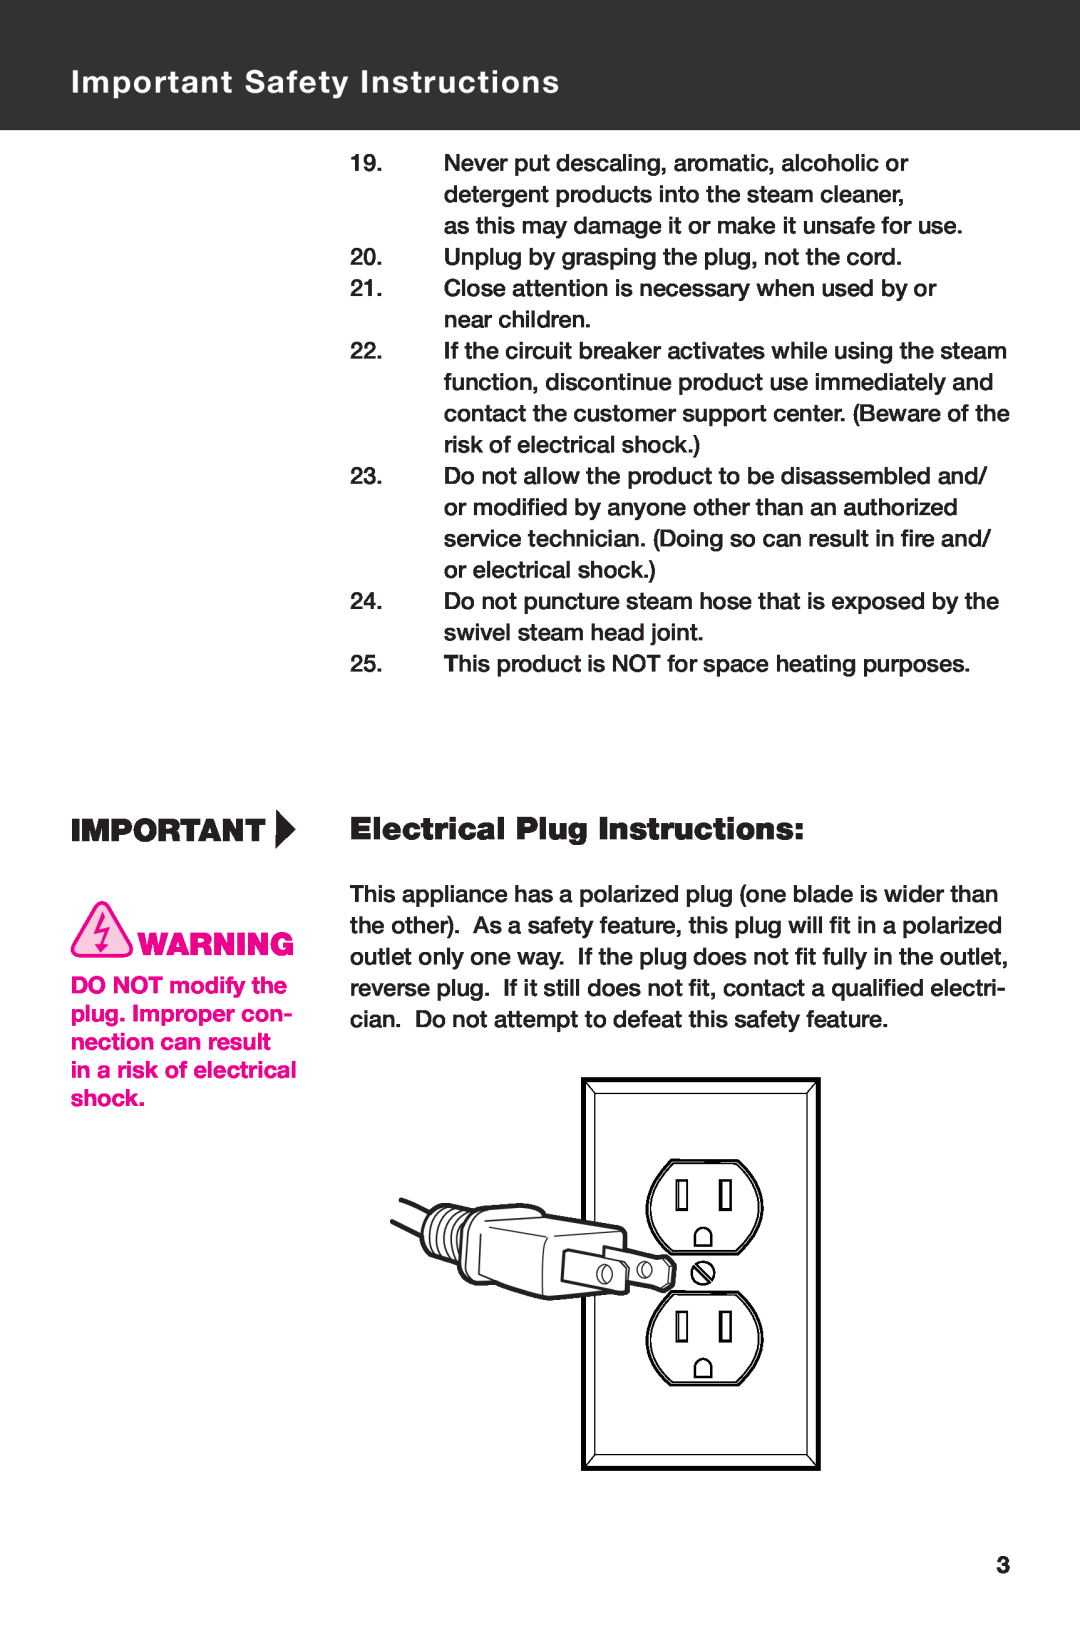 Haan SI-75 instruction manual Electrical Plug Instructions, Important Safety Instructions 